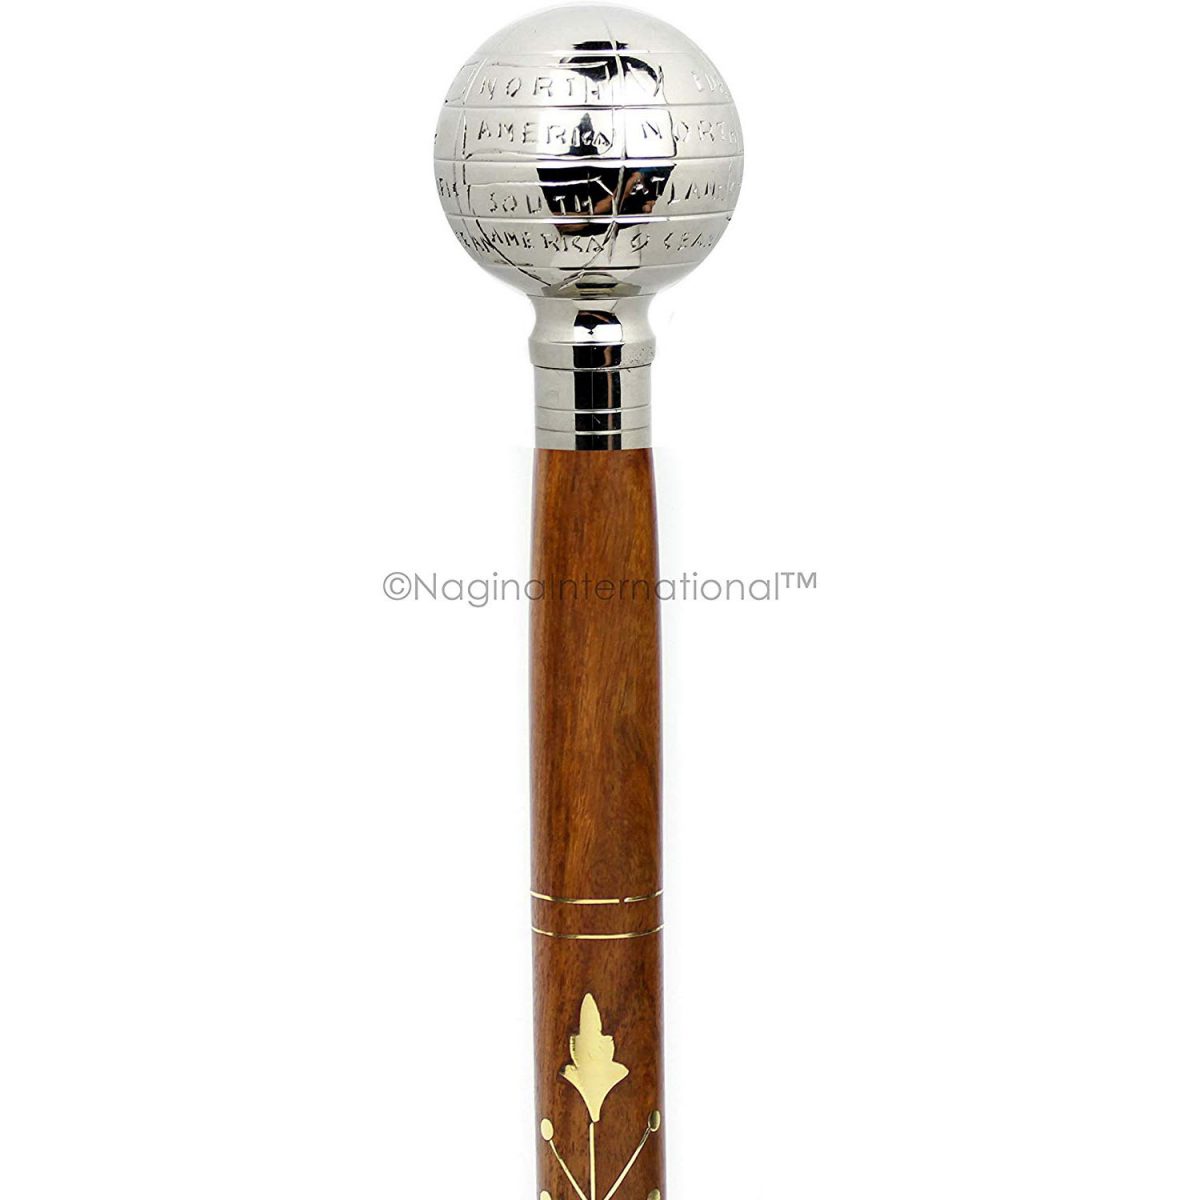 Premium Chromed Deluxe Walking Sticks | Rosewood Crafted Walking Cane with Solid Brass Chrome Decorative Bars | Walking Canes & Crutches | Nagina International (Globe)